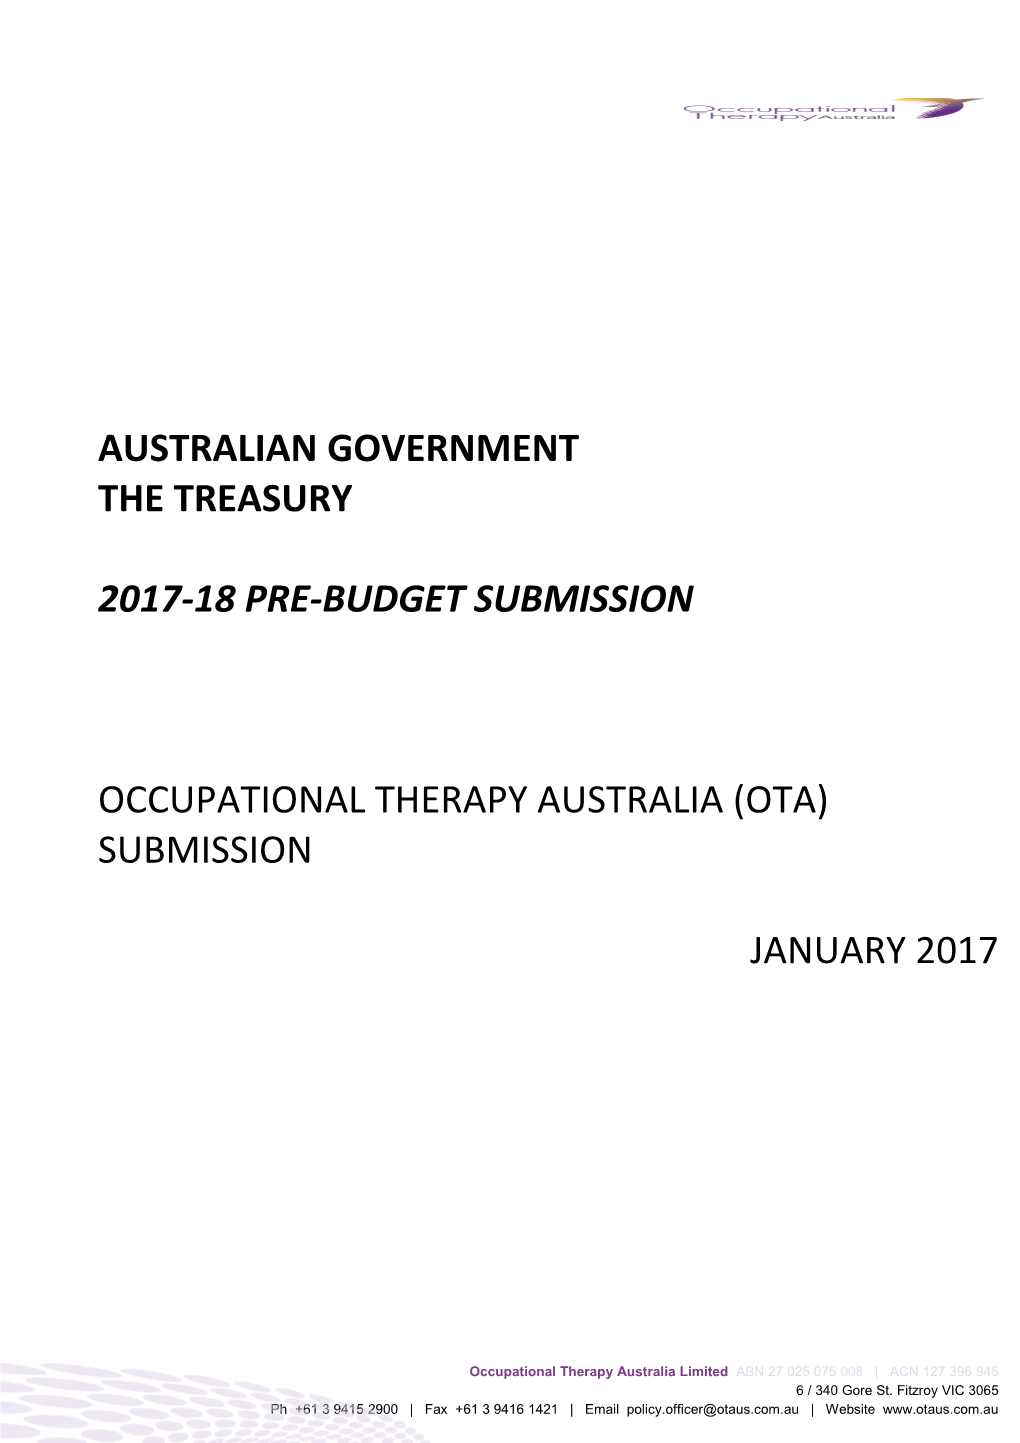 Occupational Therapy Australia - 2017-18 Pre-Budget Submission